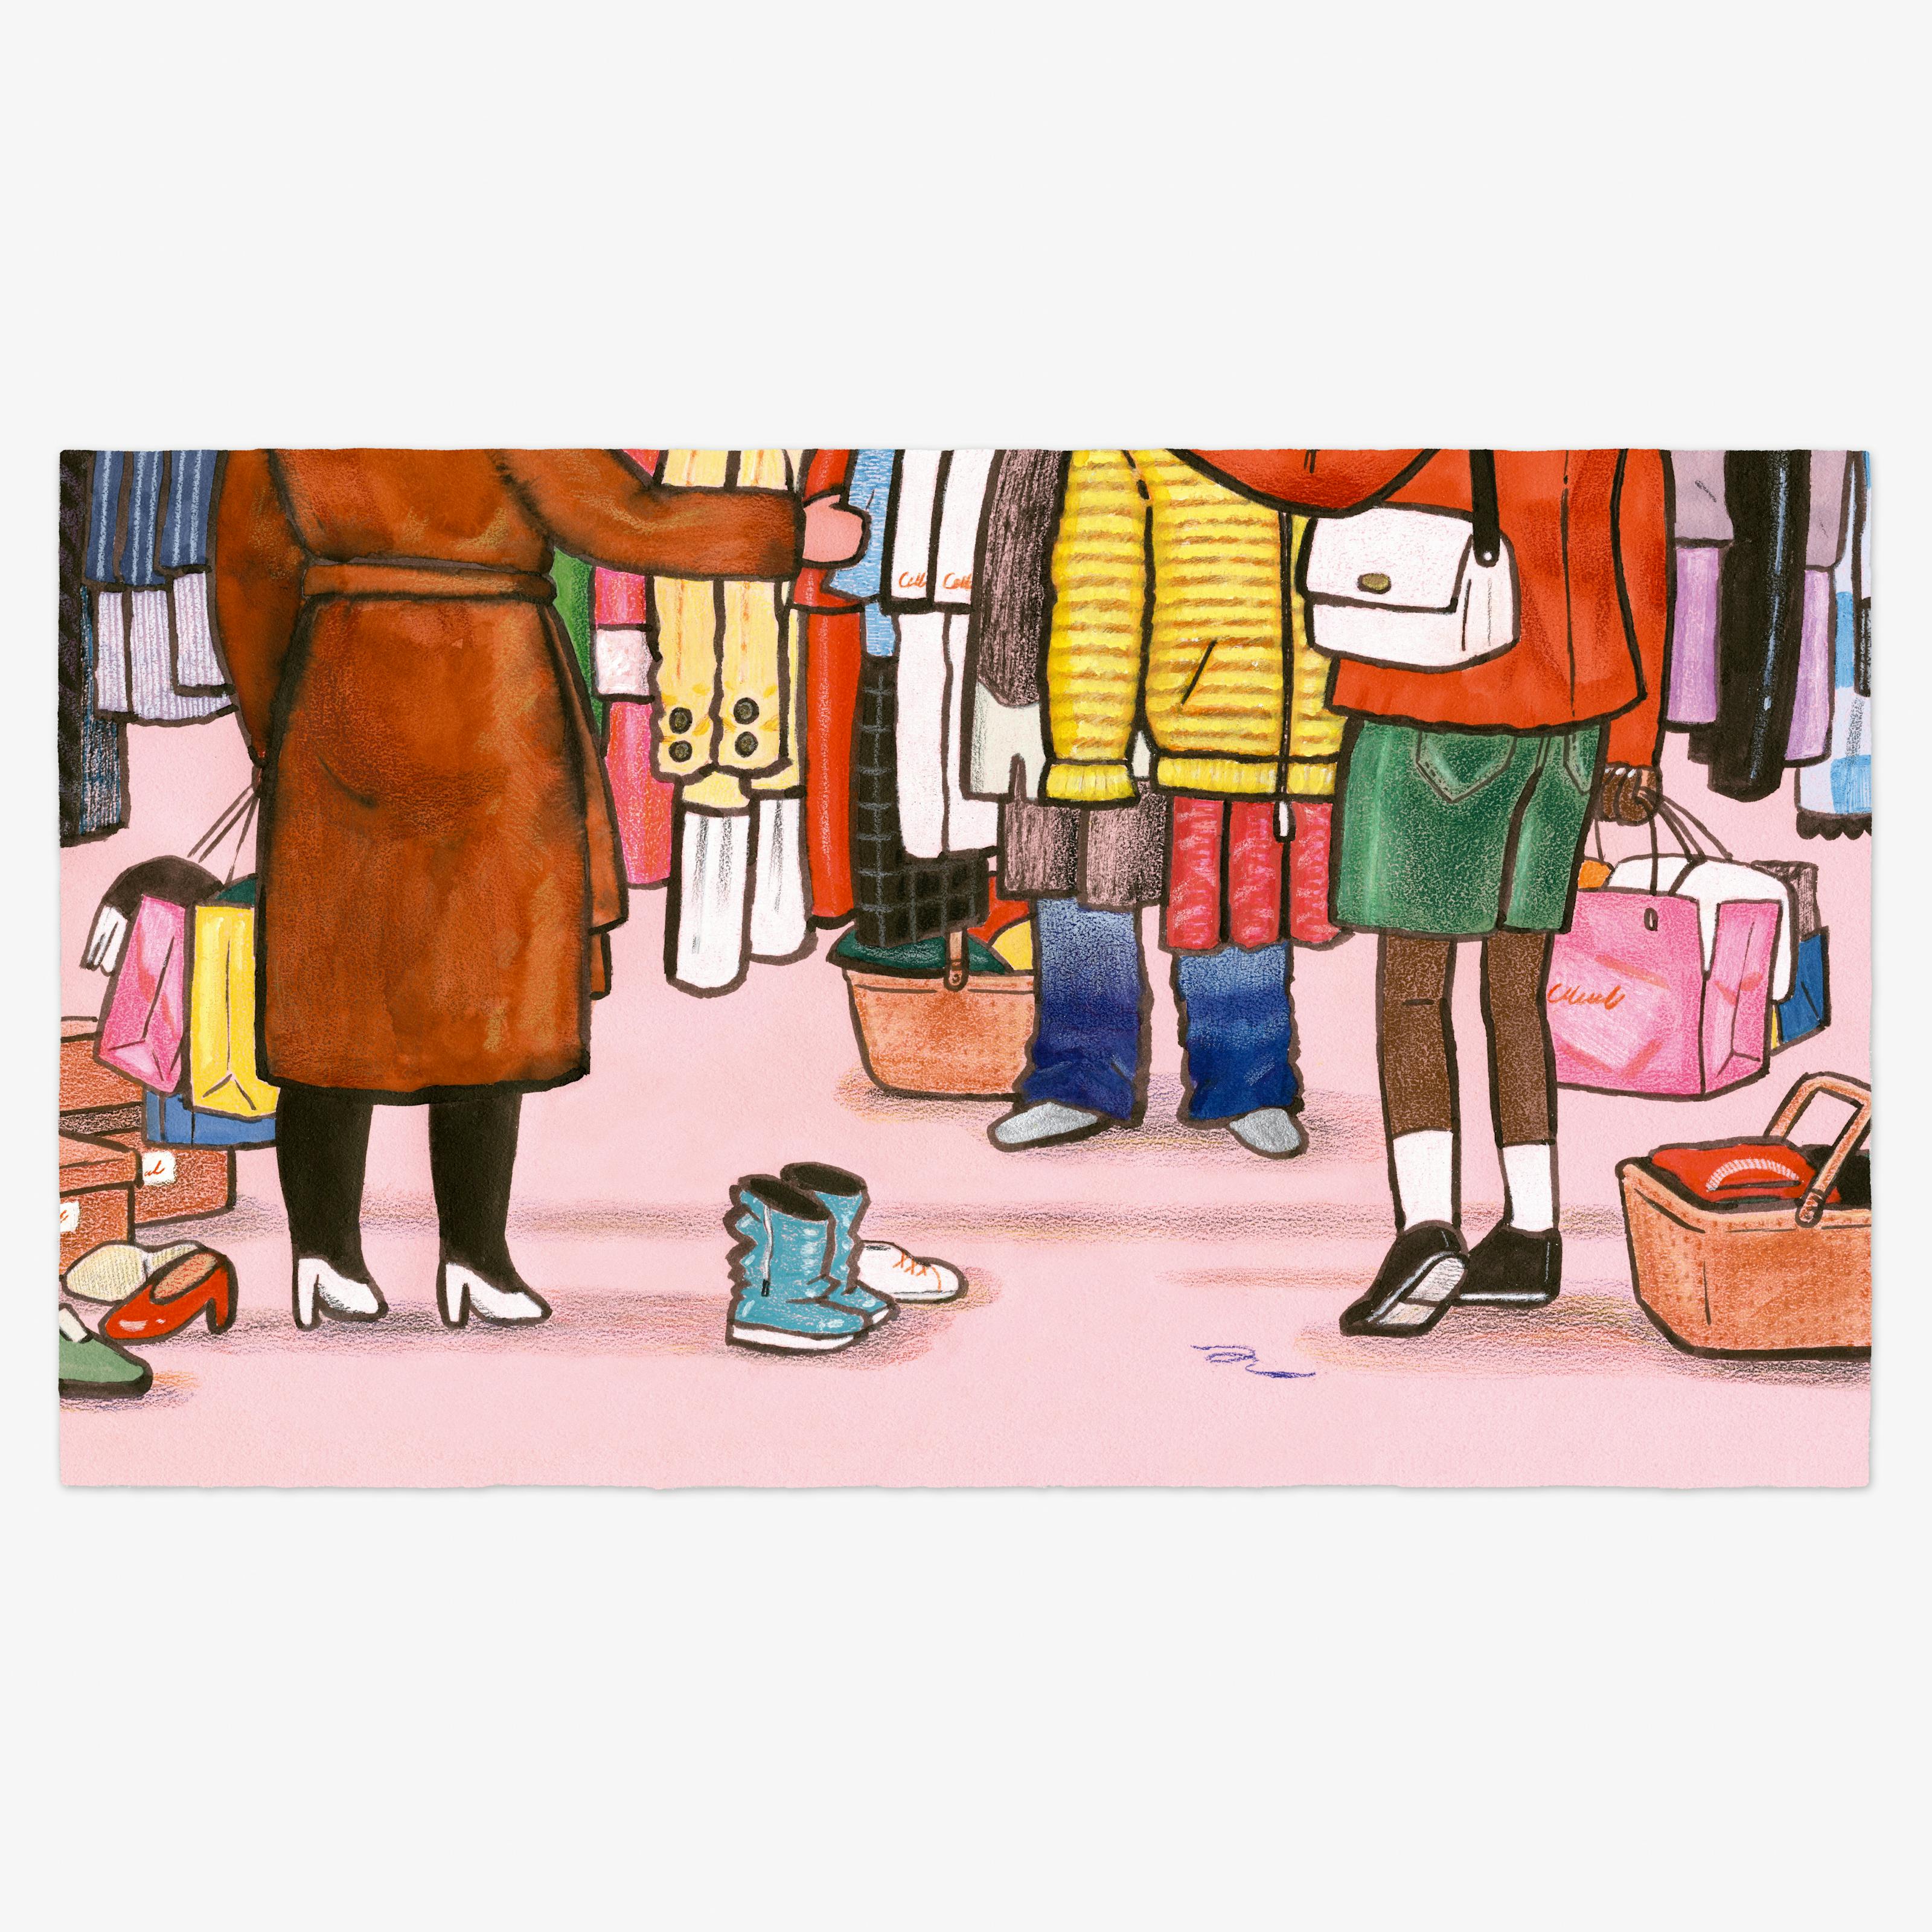 Colour hand drawn artwork showing a clothing market scene. Several people are depicted from the shoulders down, excluding their faces. The people who are carrying shopping bags, are browsing clothing which is hanging from a rail. On the floor are several pairs of shoes and bags and boxes.